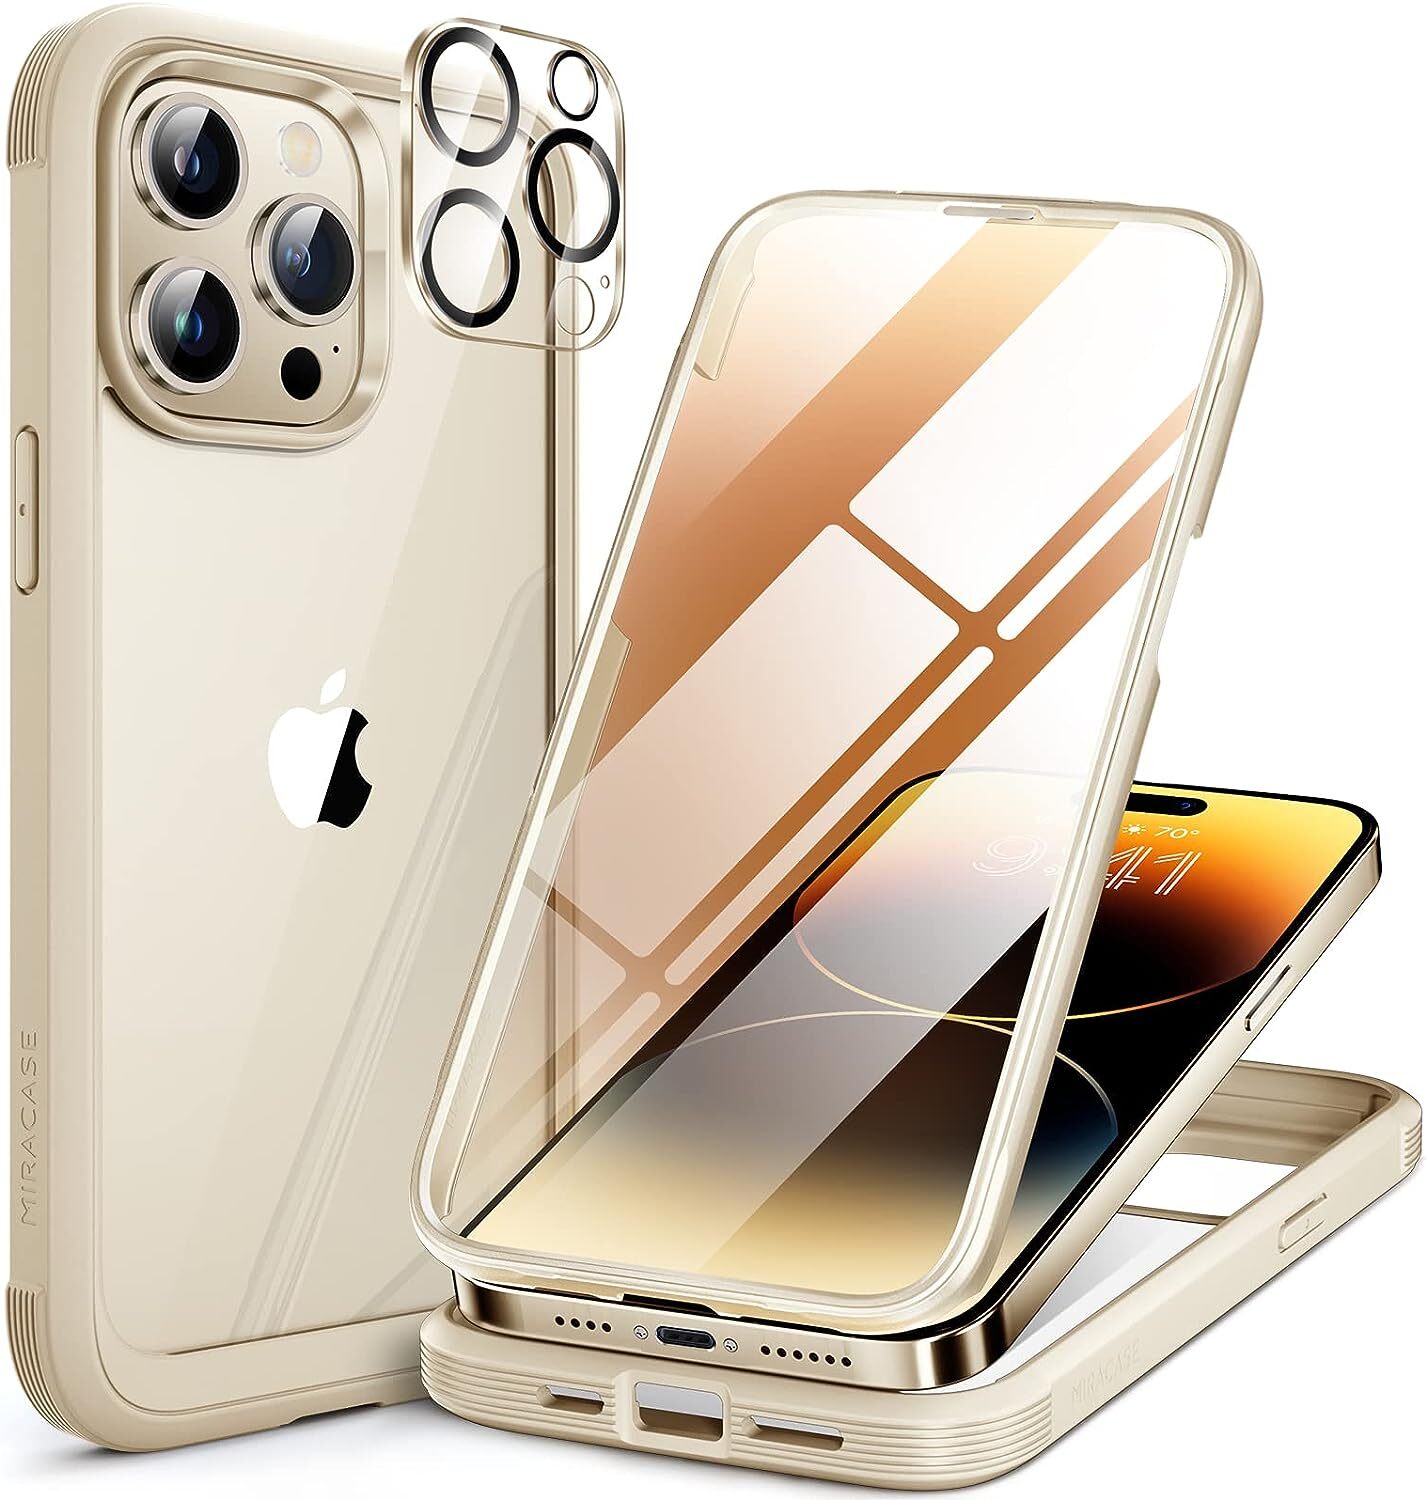 A beige, heavy-duty phone case installed on a phone